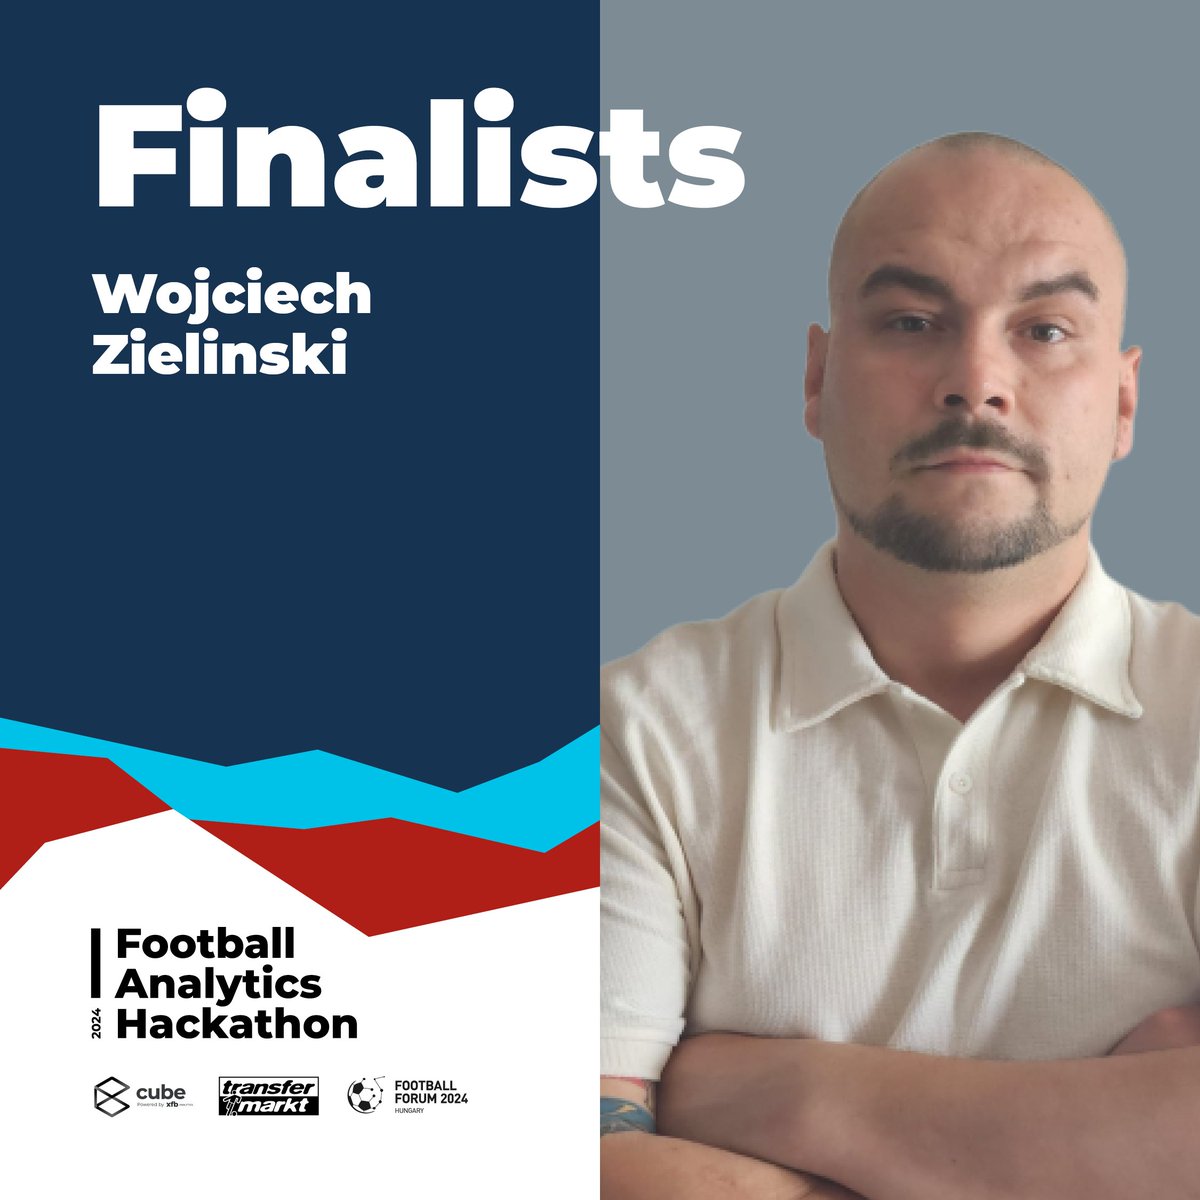 🔥 INTRODUCING HACKATHON FINALISTS 🔥 Wojciech Zielinski (34, Poland) Originally from Poland and currently residing in Stockholm. Data analyst with a deep passion for sports, particularly football and basketball. He specializes in crafting detailed data-driven reports and